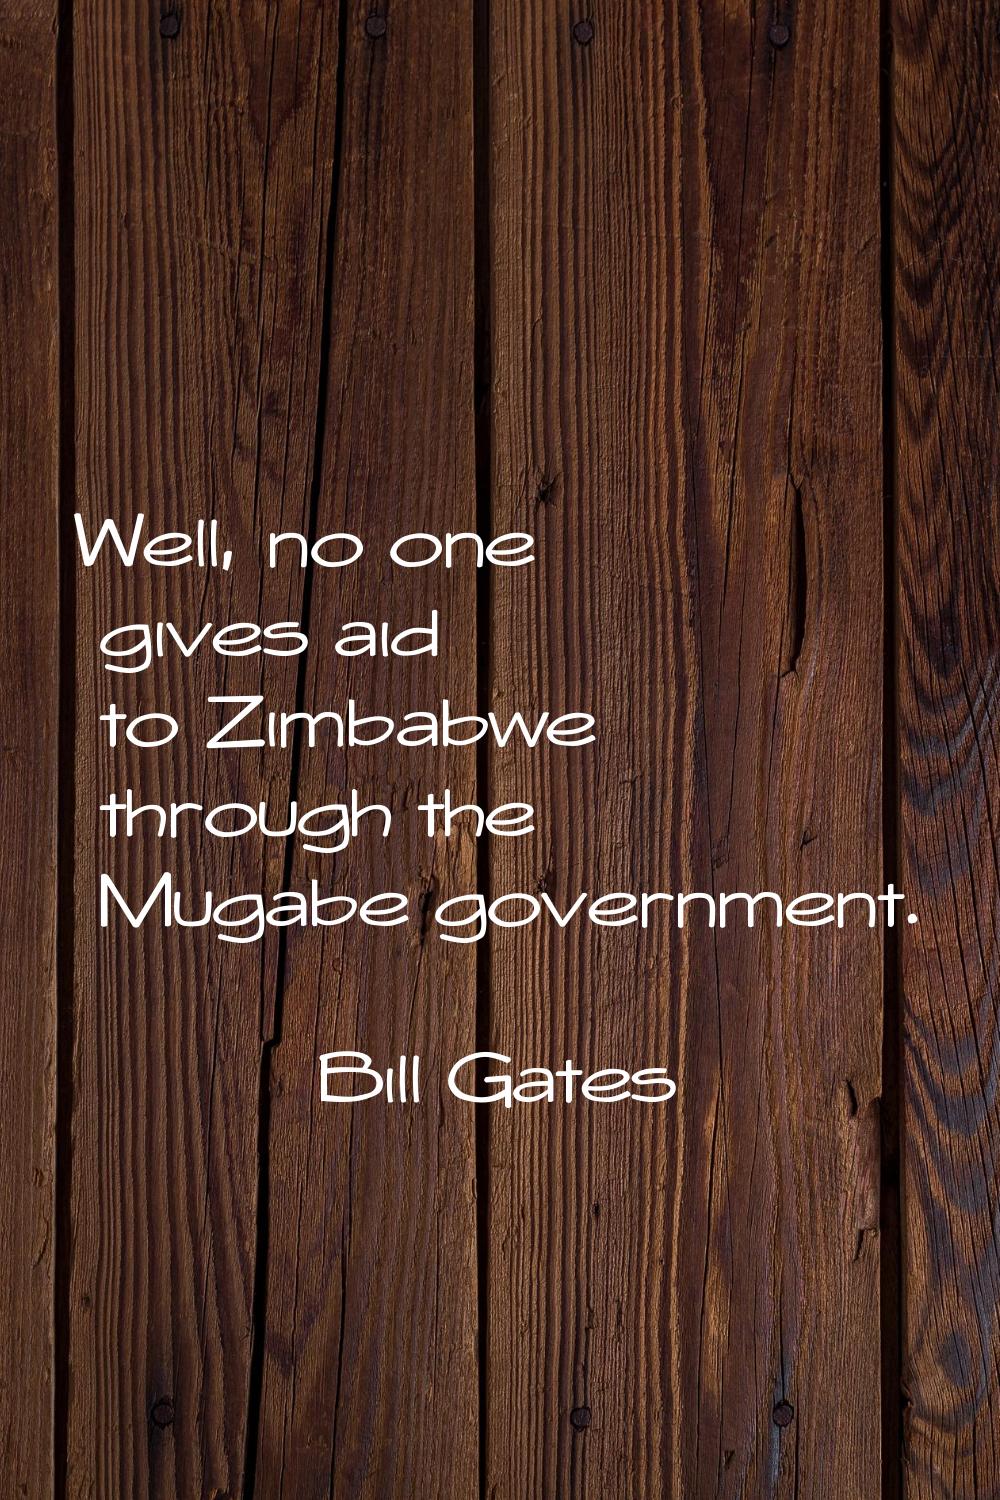 Well, no one gives aid to Zimbabwe through the Mugabe government.